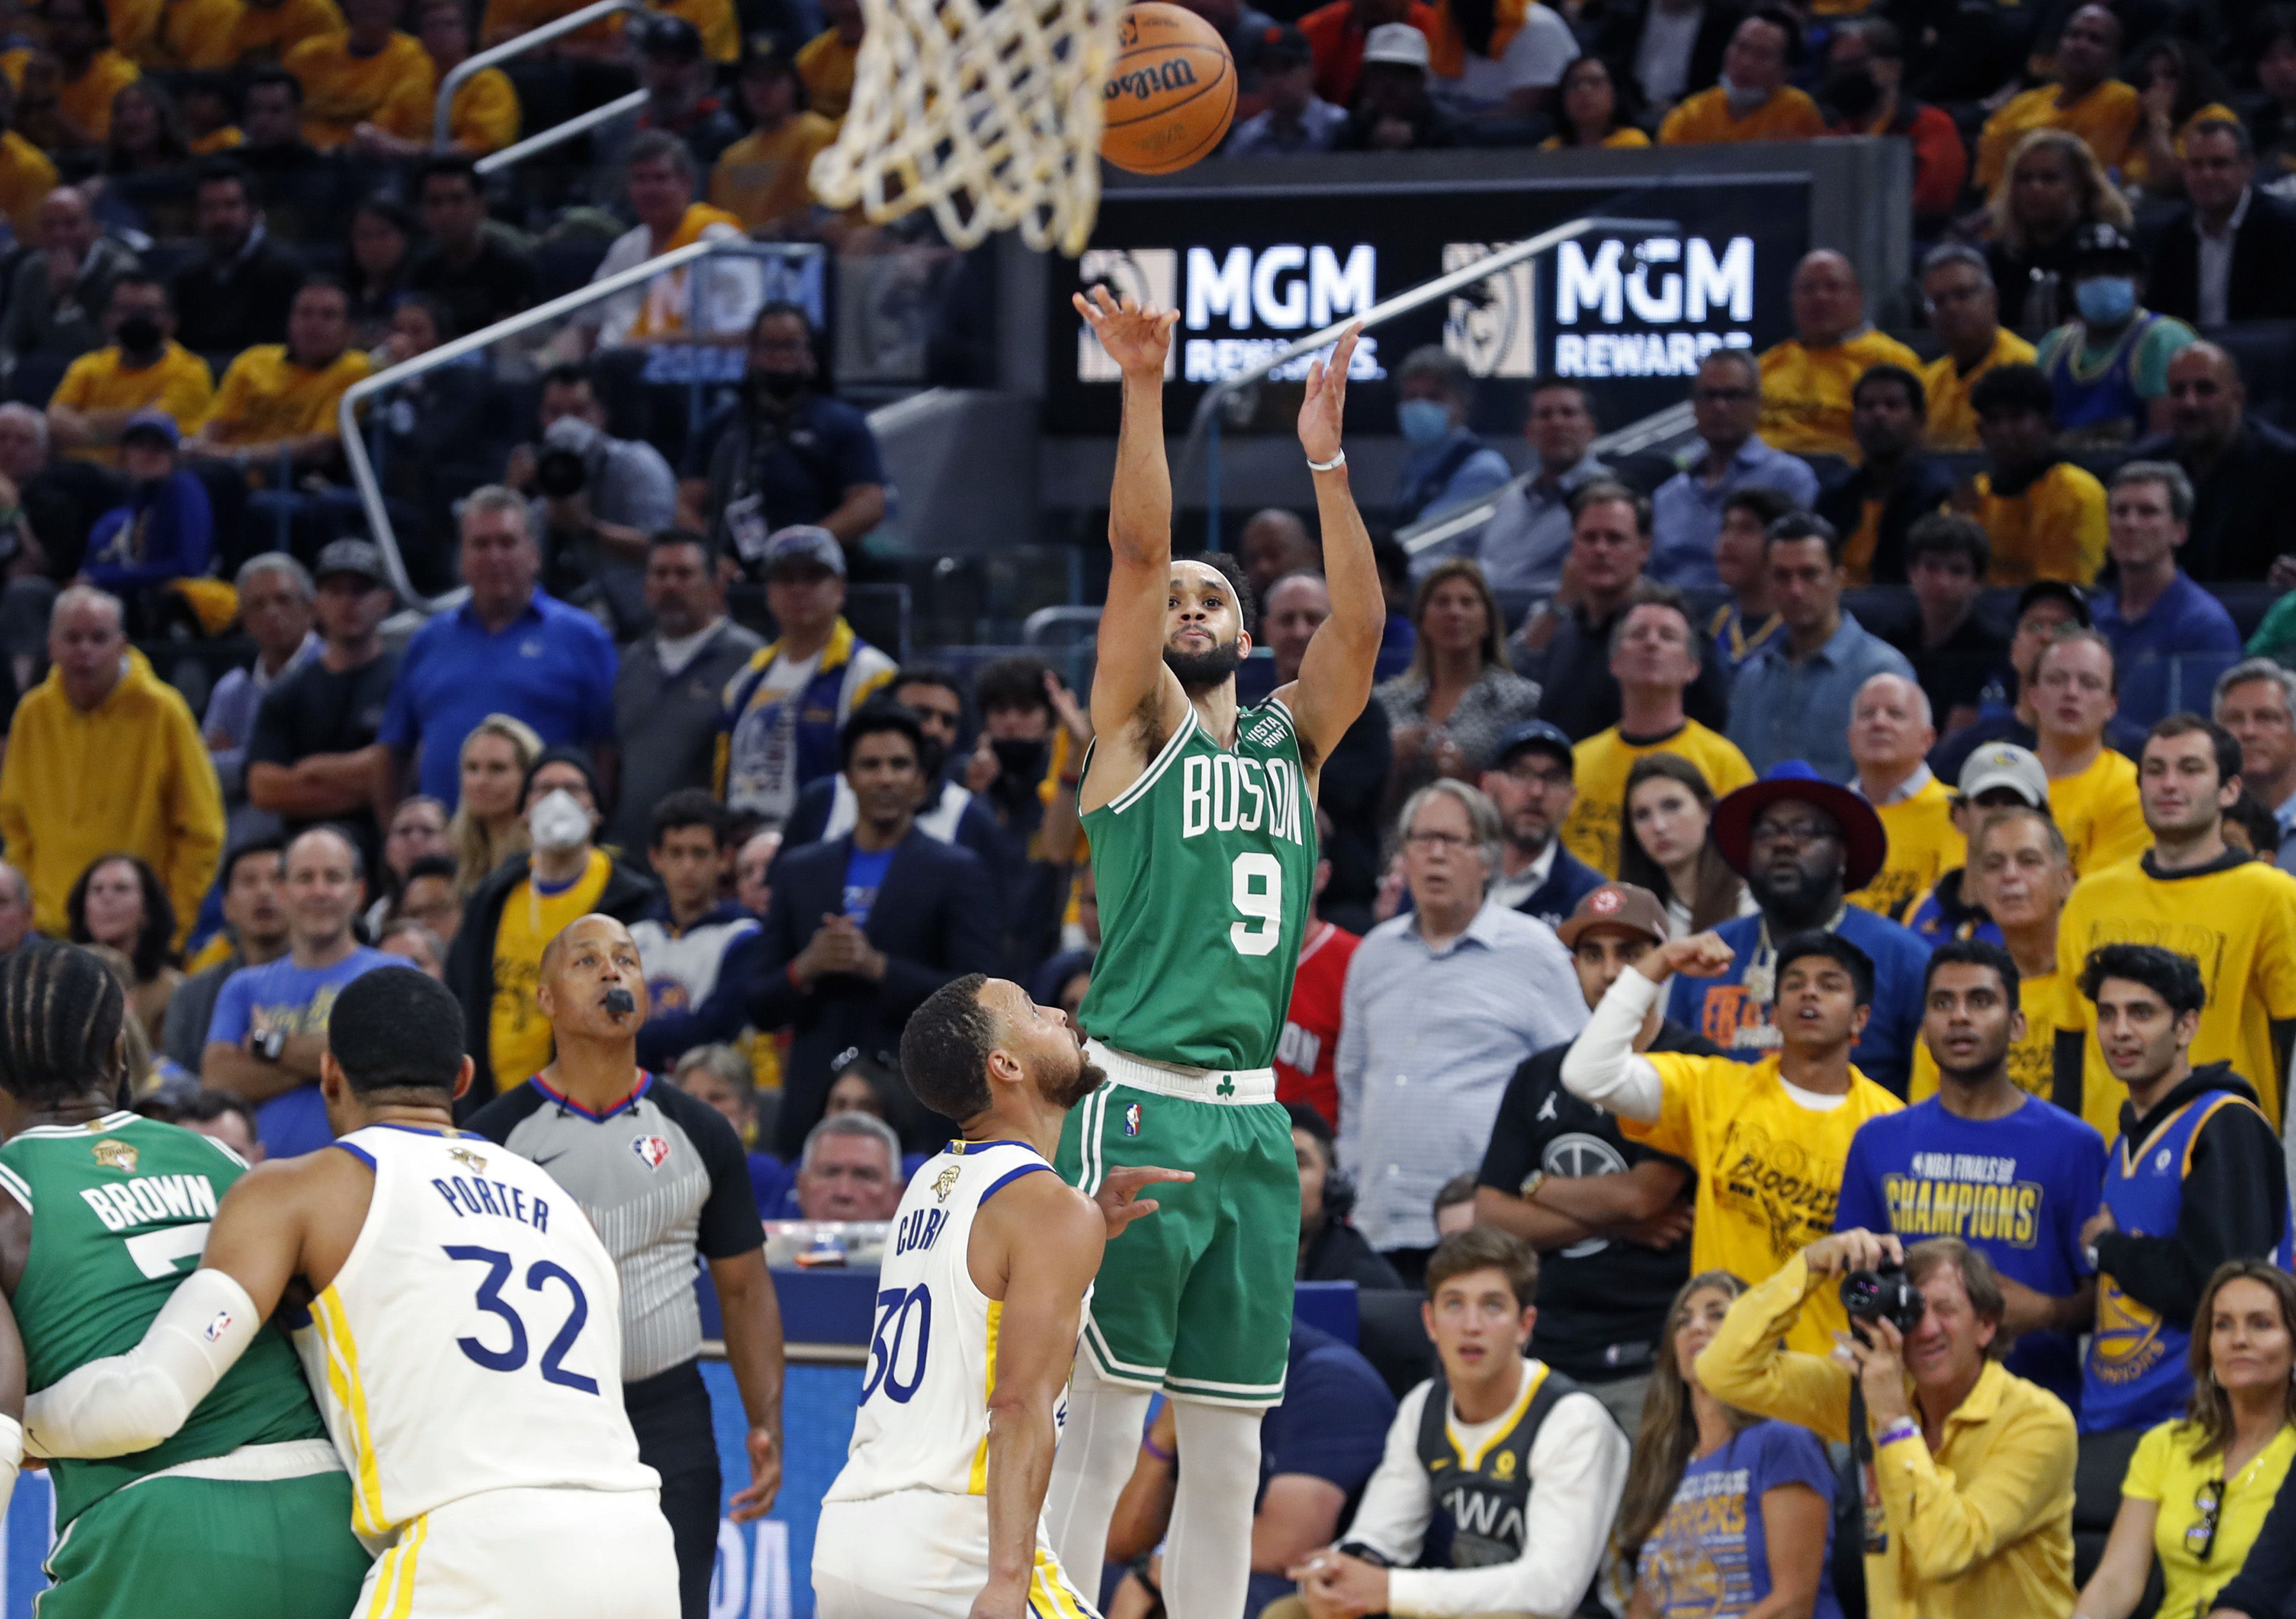 Celtics can't hold onto home-court edge on once-fearsome parquet floor -  The San Diego Union-Tribune